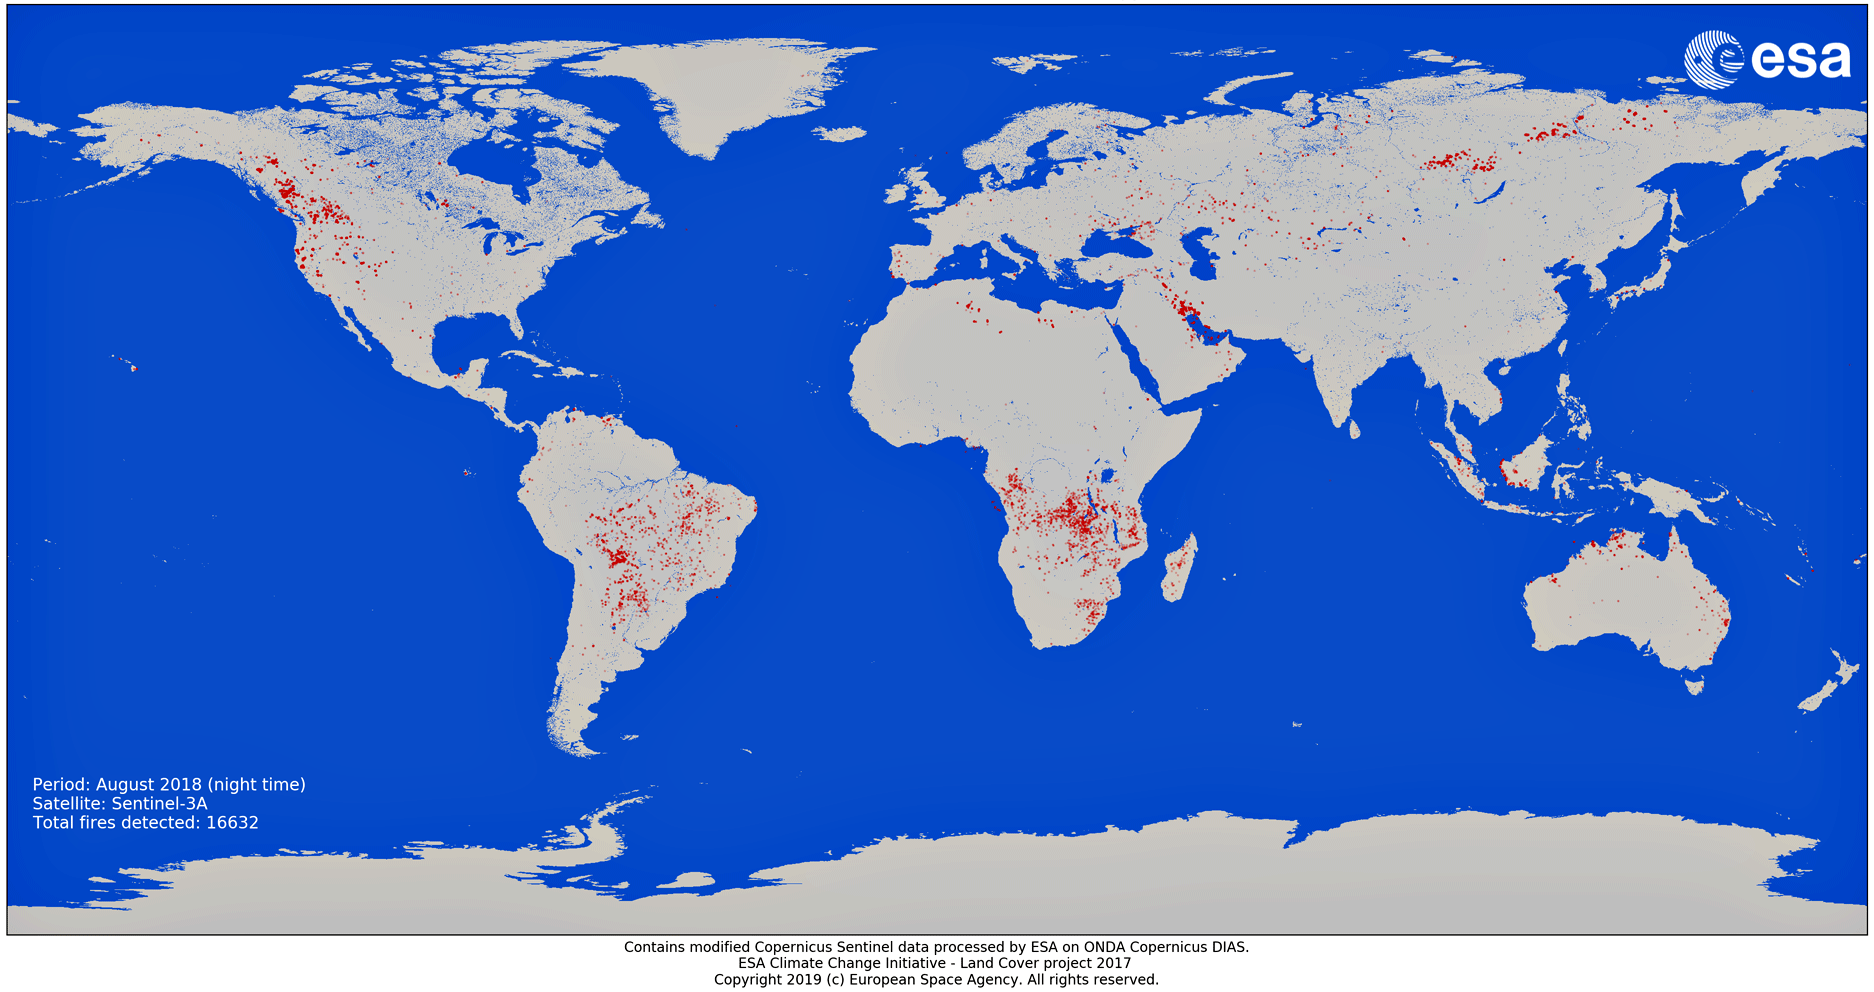 Figure 9: Using Copernicus Sentinel-3 data, as part of the Sentinel-3 World Fires Atlas, the image shows that 79,000 fires were detected at night around the world in the month of August 2019 compared to 16,632 fires in August 2018 (image credit: ESA, the image contains modified Copernicus Sentinel data (2019), processed by ESA on ONDA Copernicus DIAS)